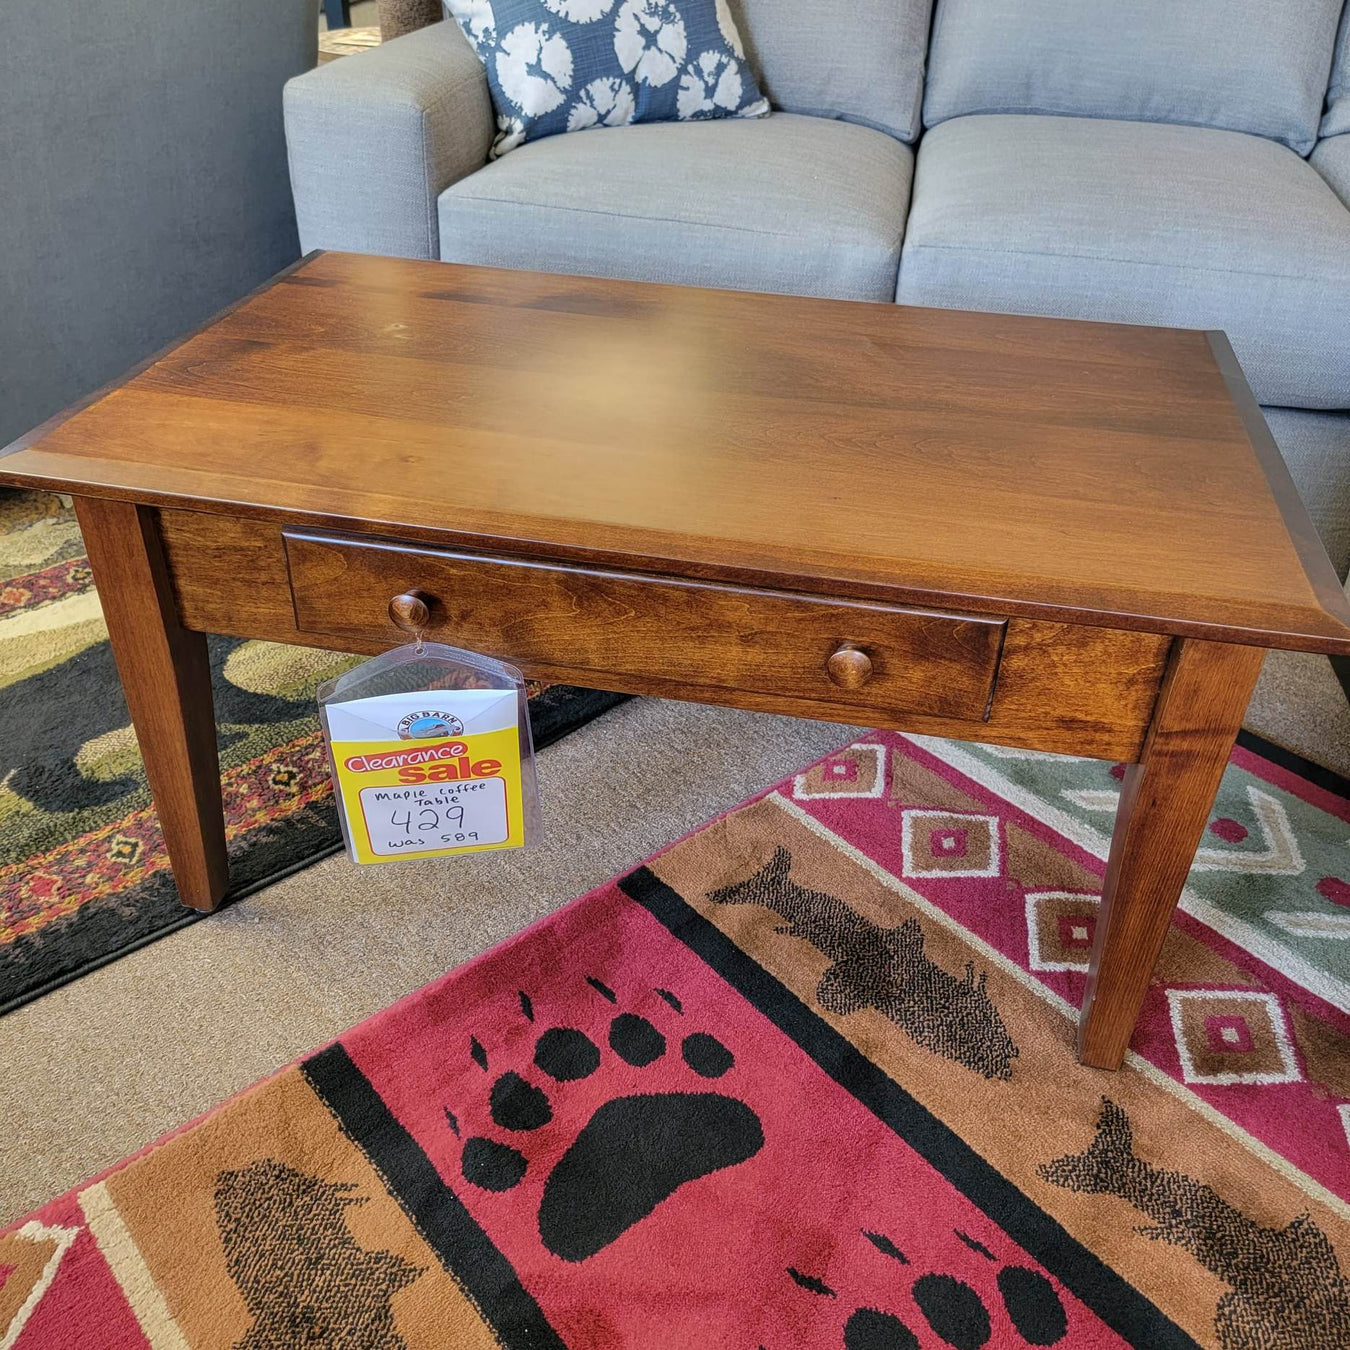 Amish Coffee Tables